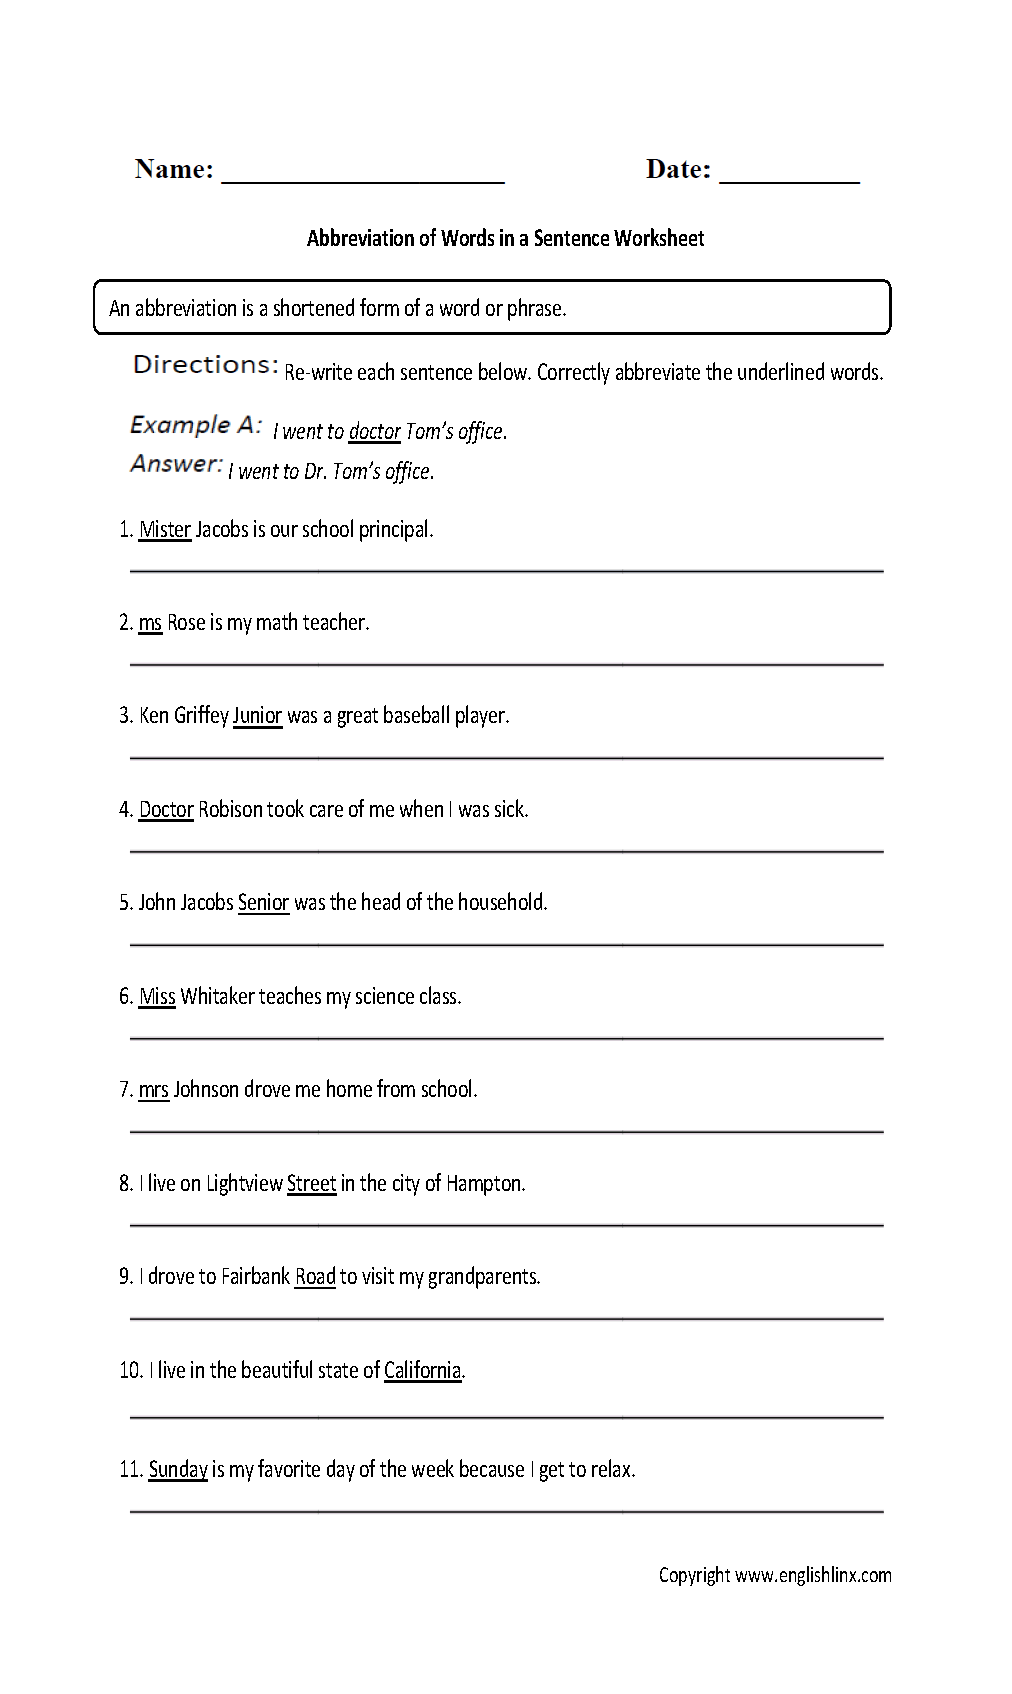 Abbreviation of Words in a Sentence Worksheet